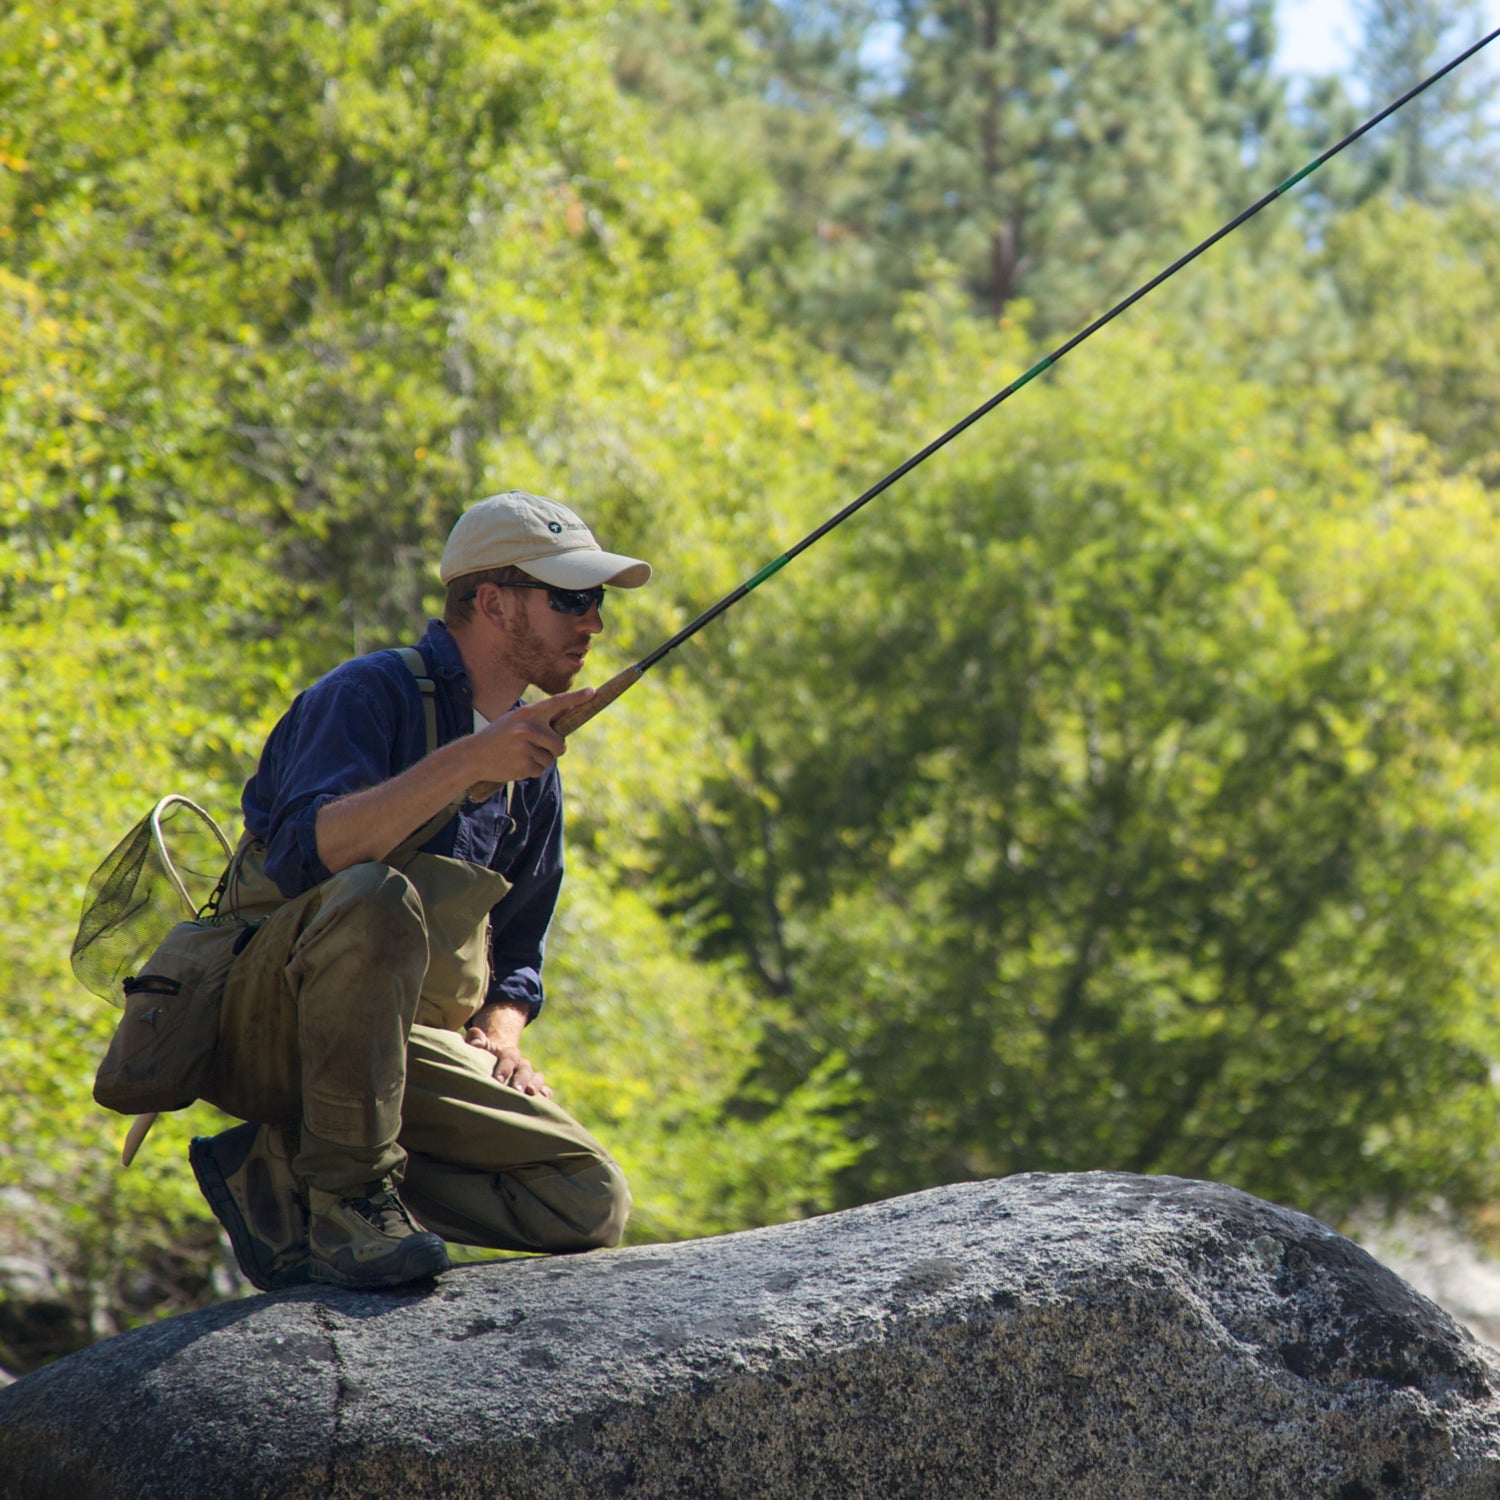 All About Lightweight Backpacking Fishing Rods - The Backpacking Site